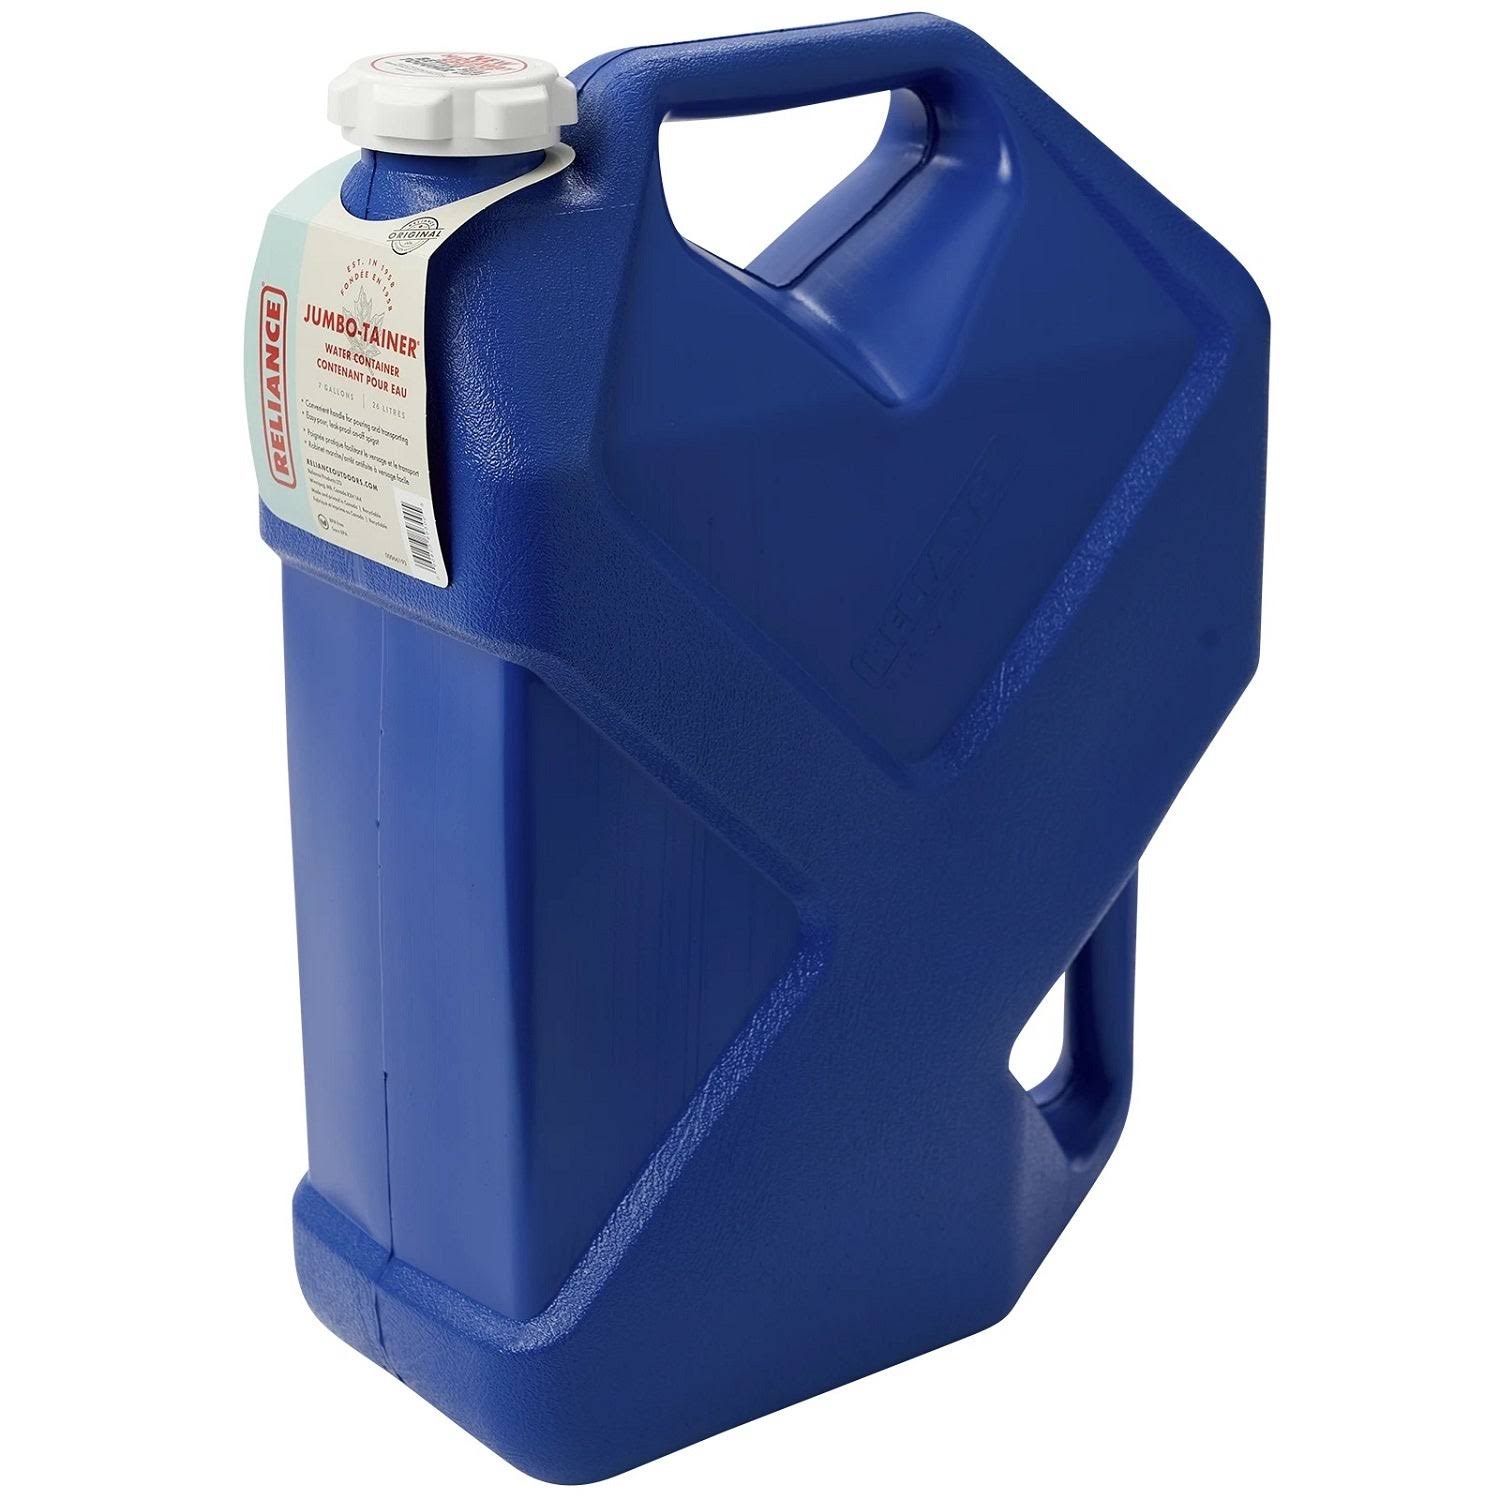 Jumbo-Tainer 2.0 26L Tank - Reliance Products